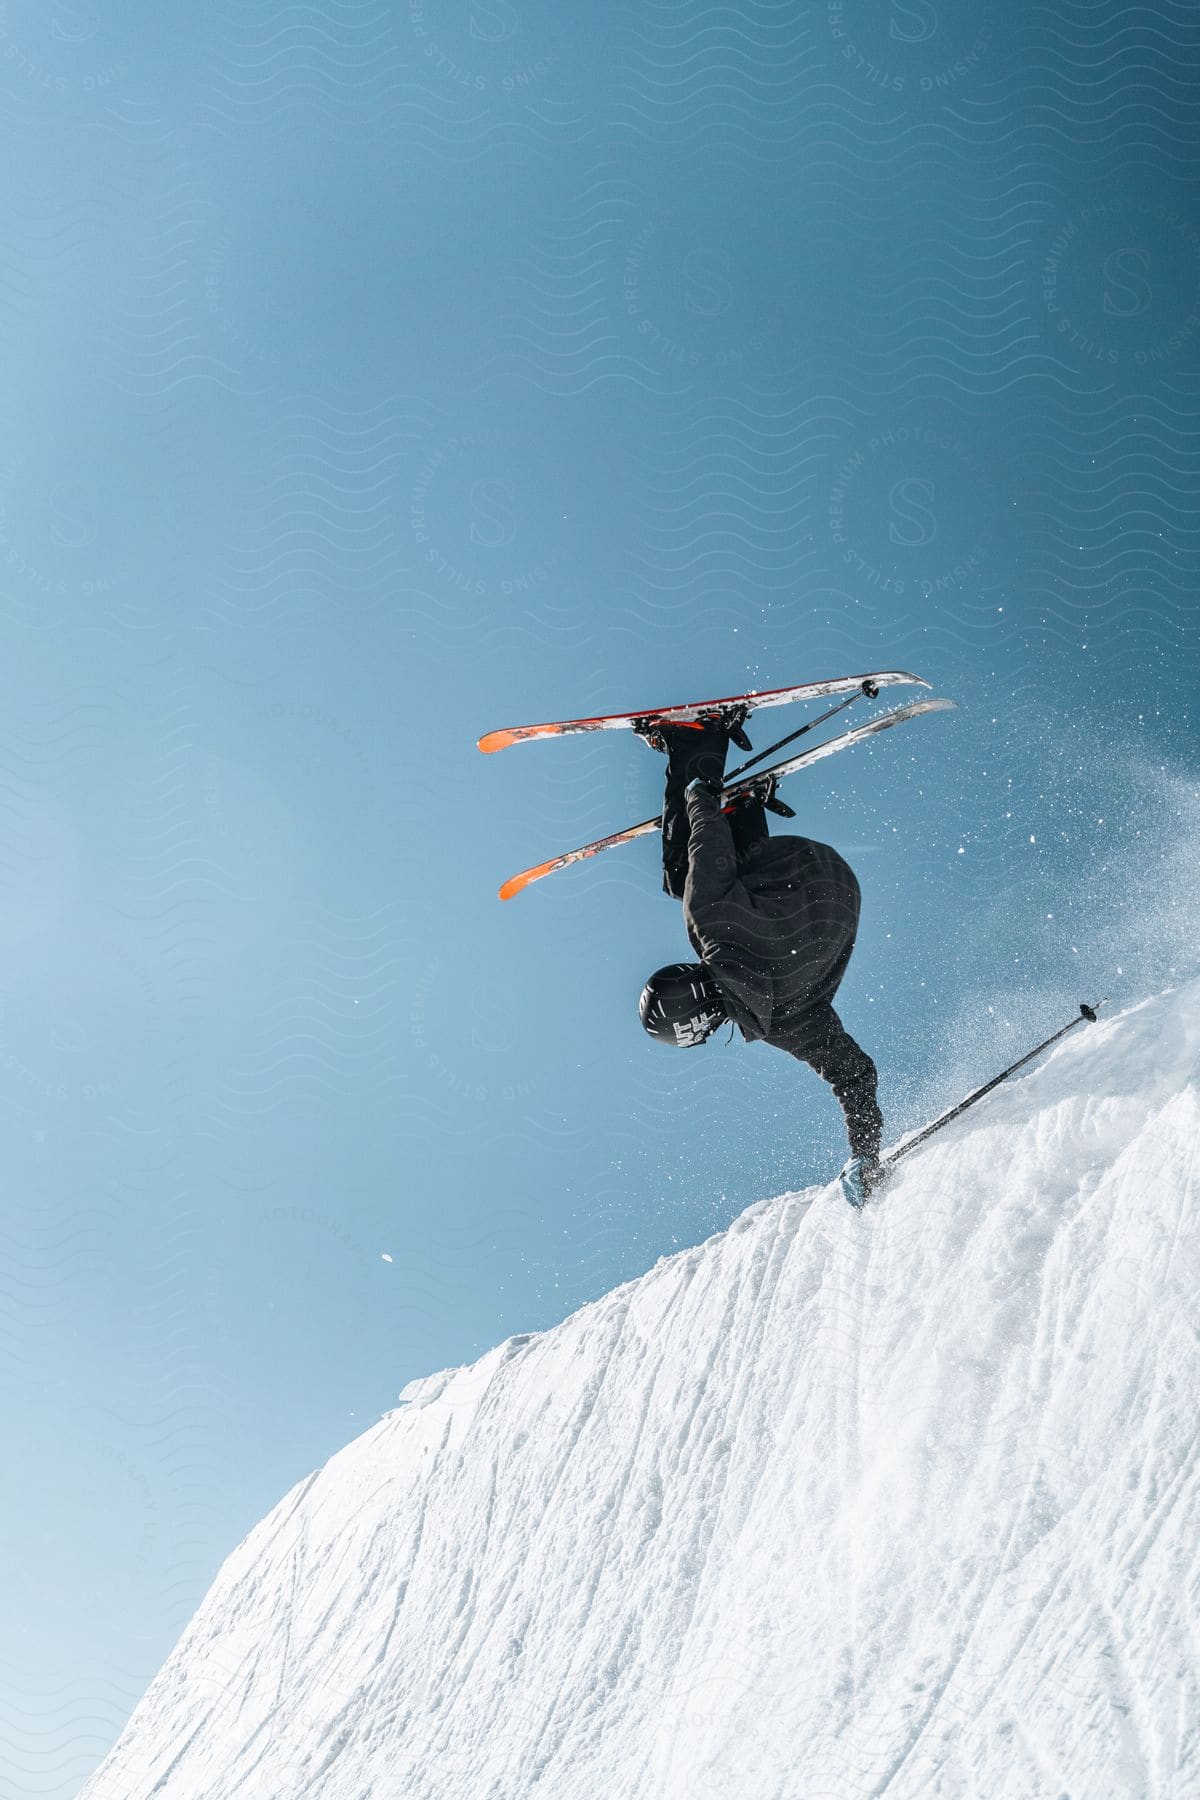 A man is skiing and performing a trick on a snowy slope in the austrian alps